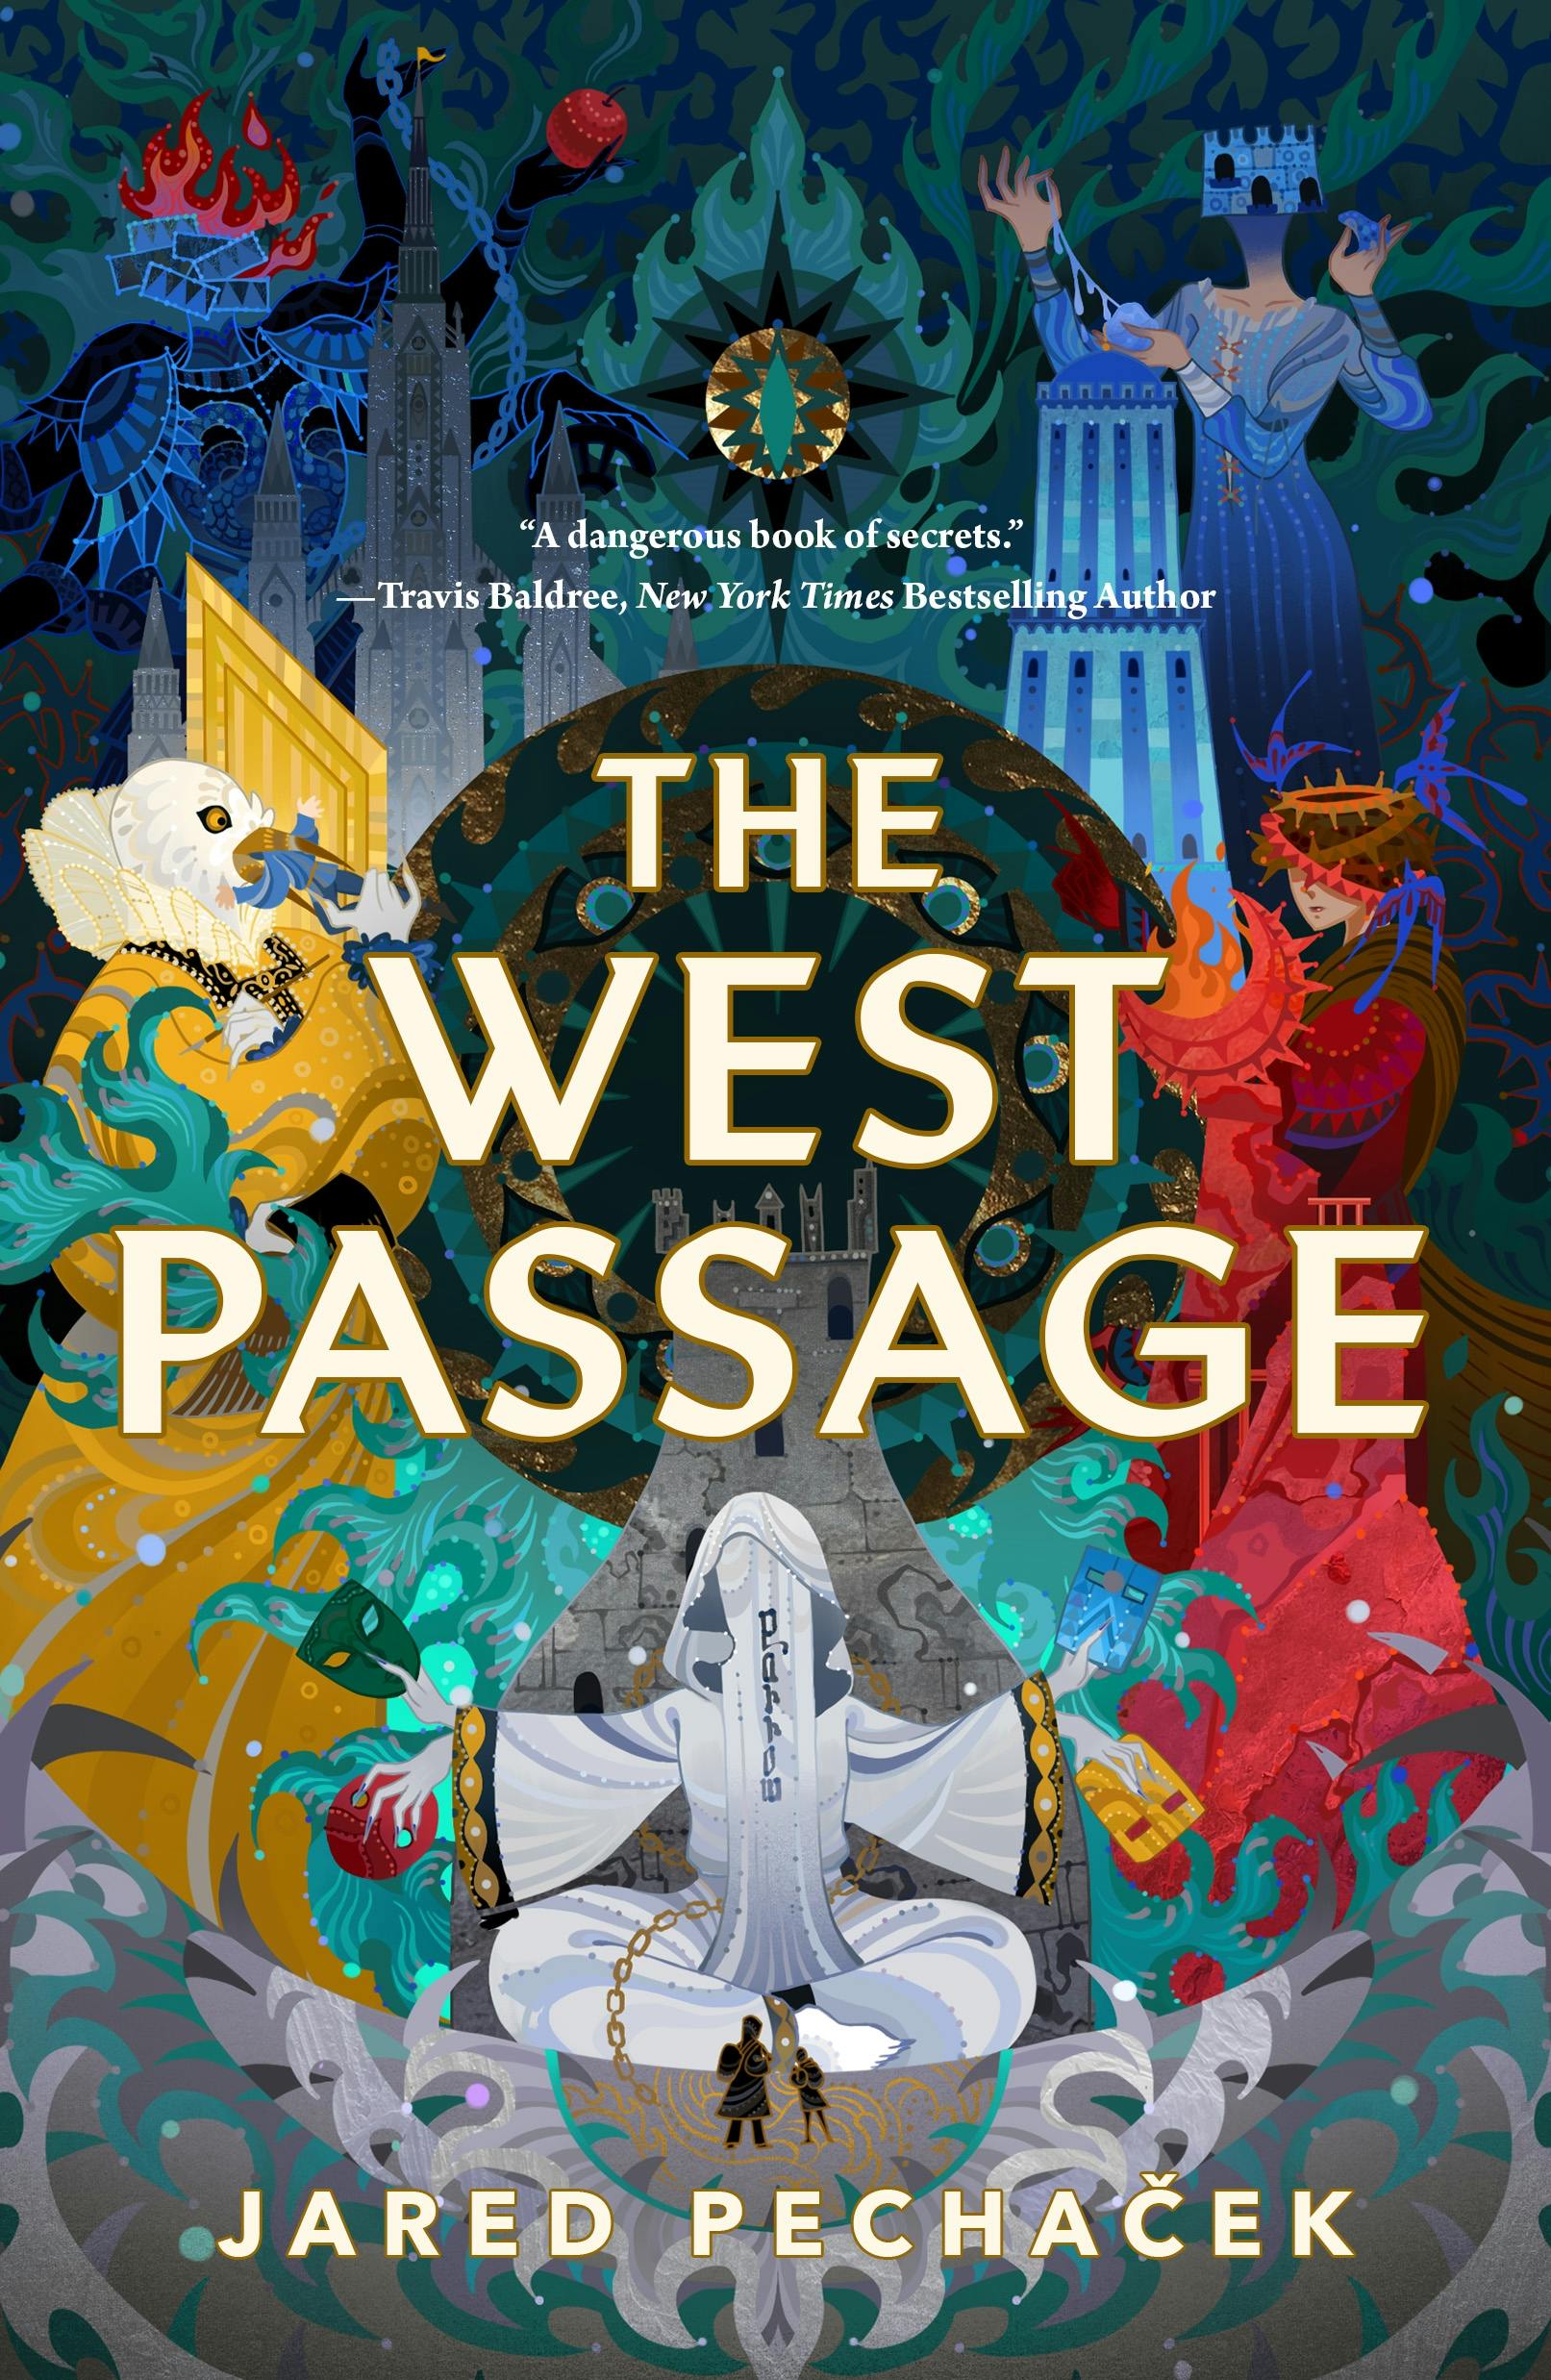 Cover for the book titled as: The West Passage